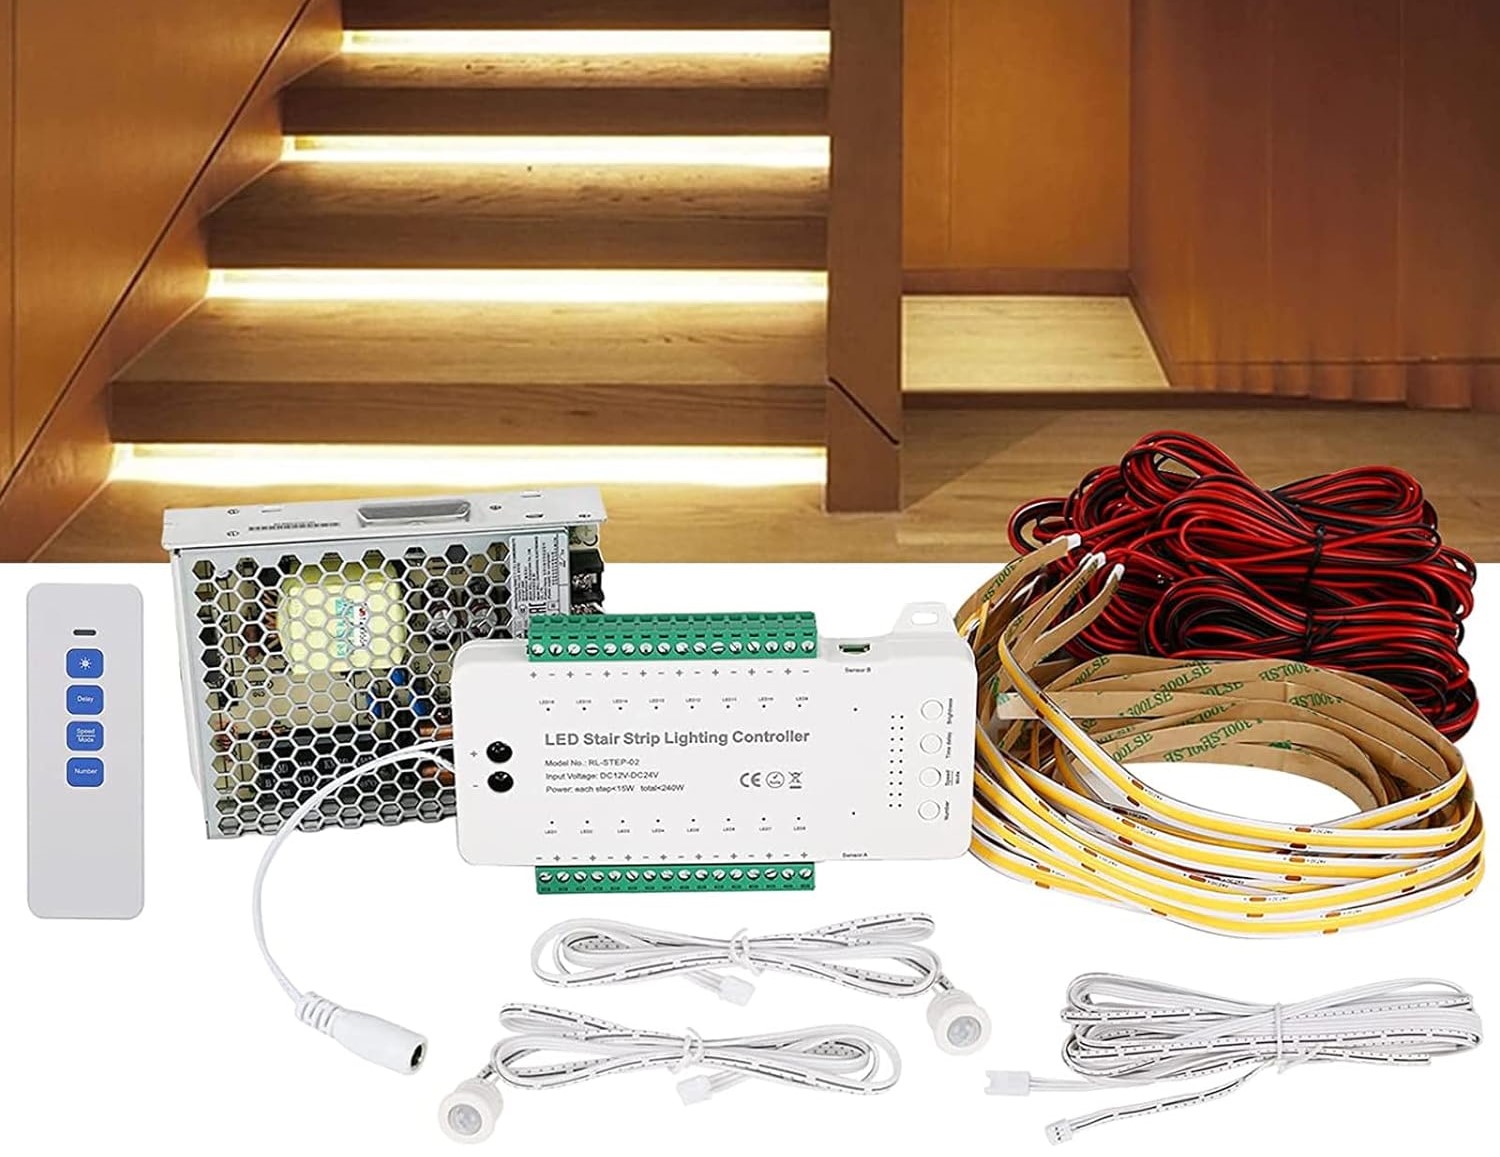 How To Wire Motion Detector Switches At The Top And Bottom Of A Staircase